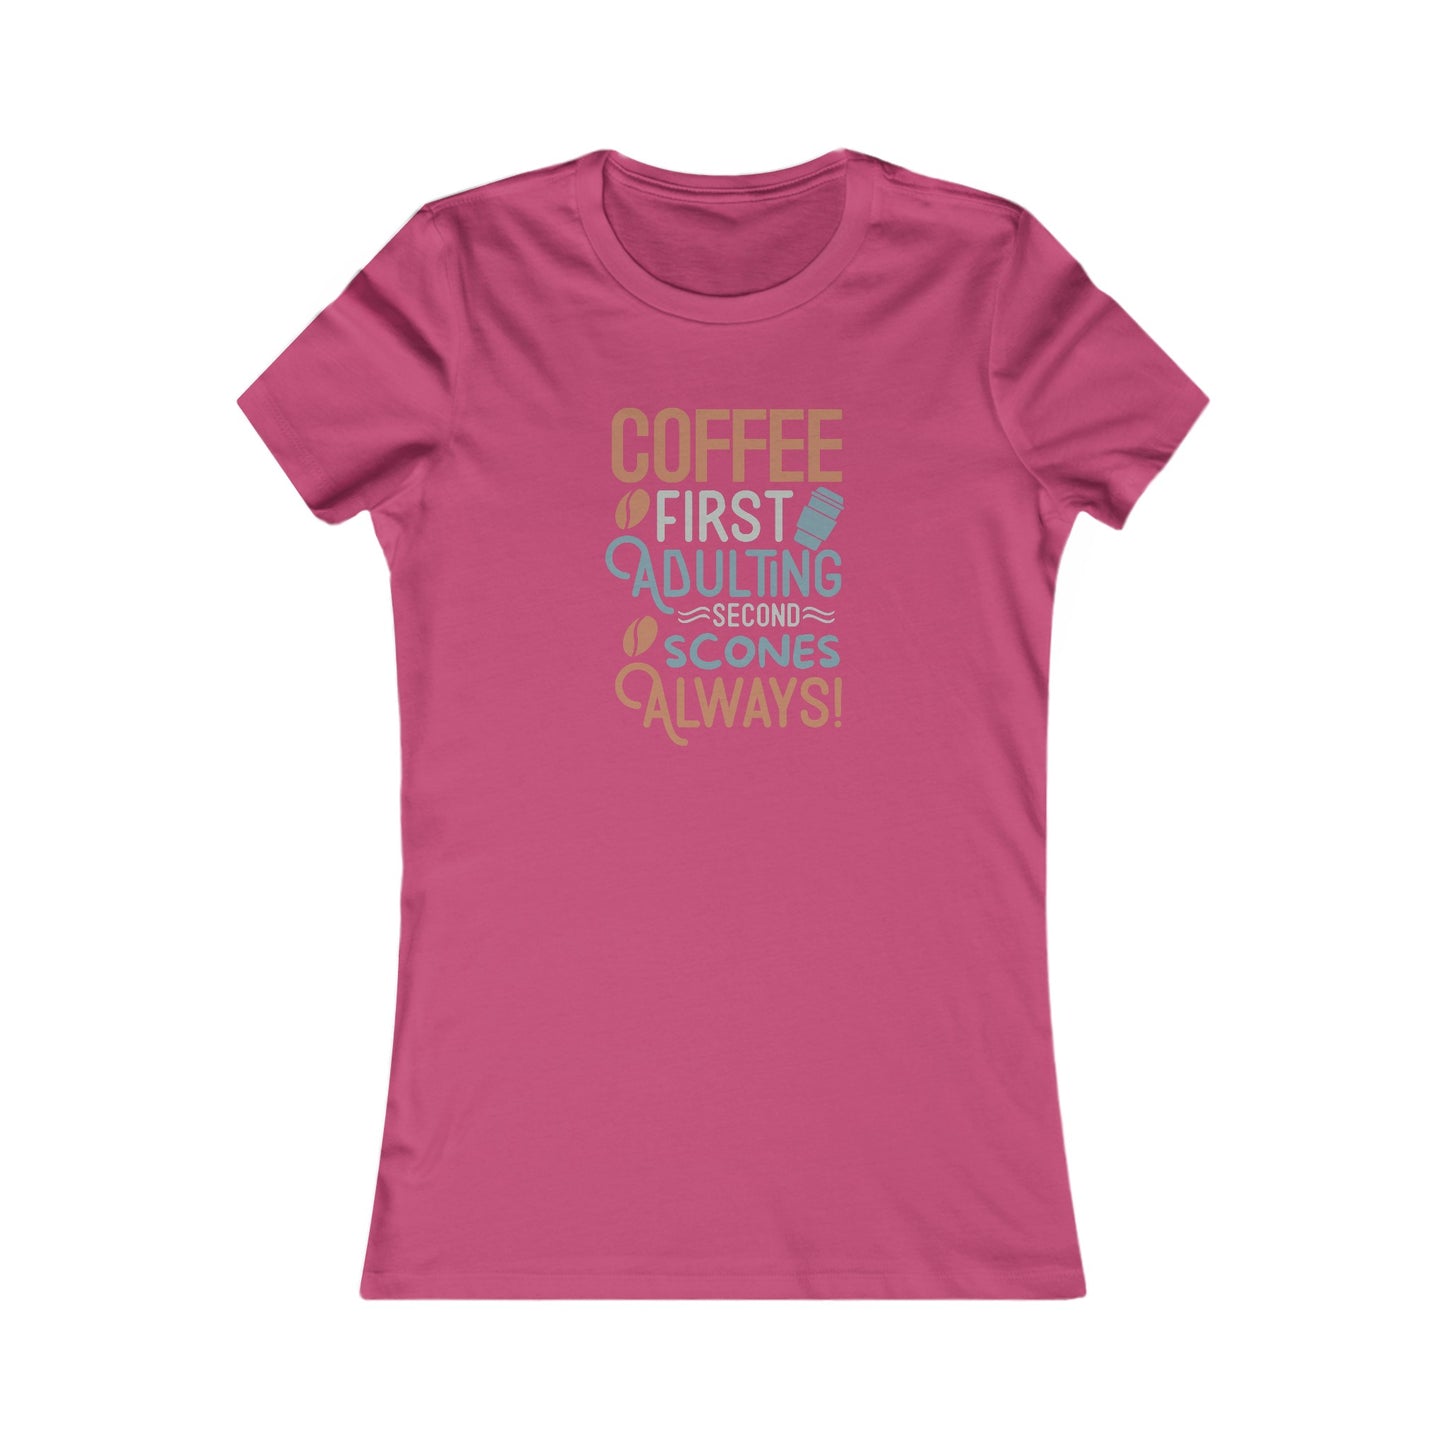 Coffee First Adulting Second Scones Always Women's T-Shirt